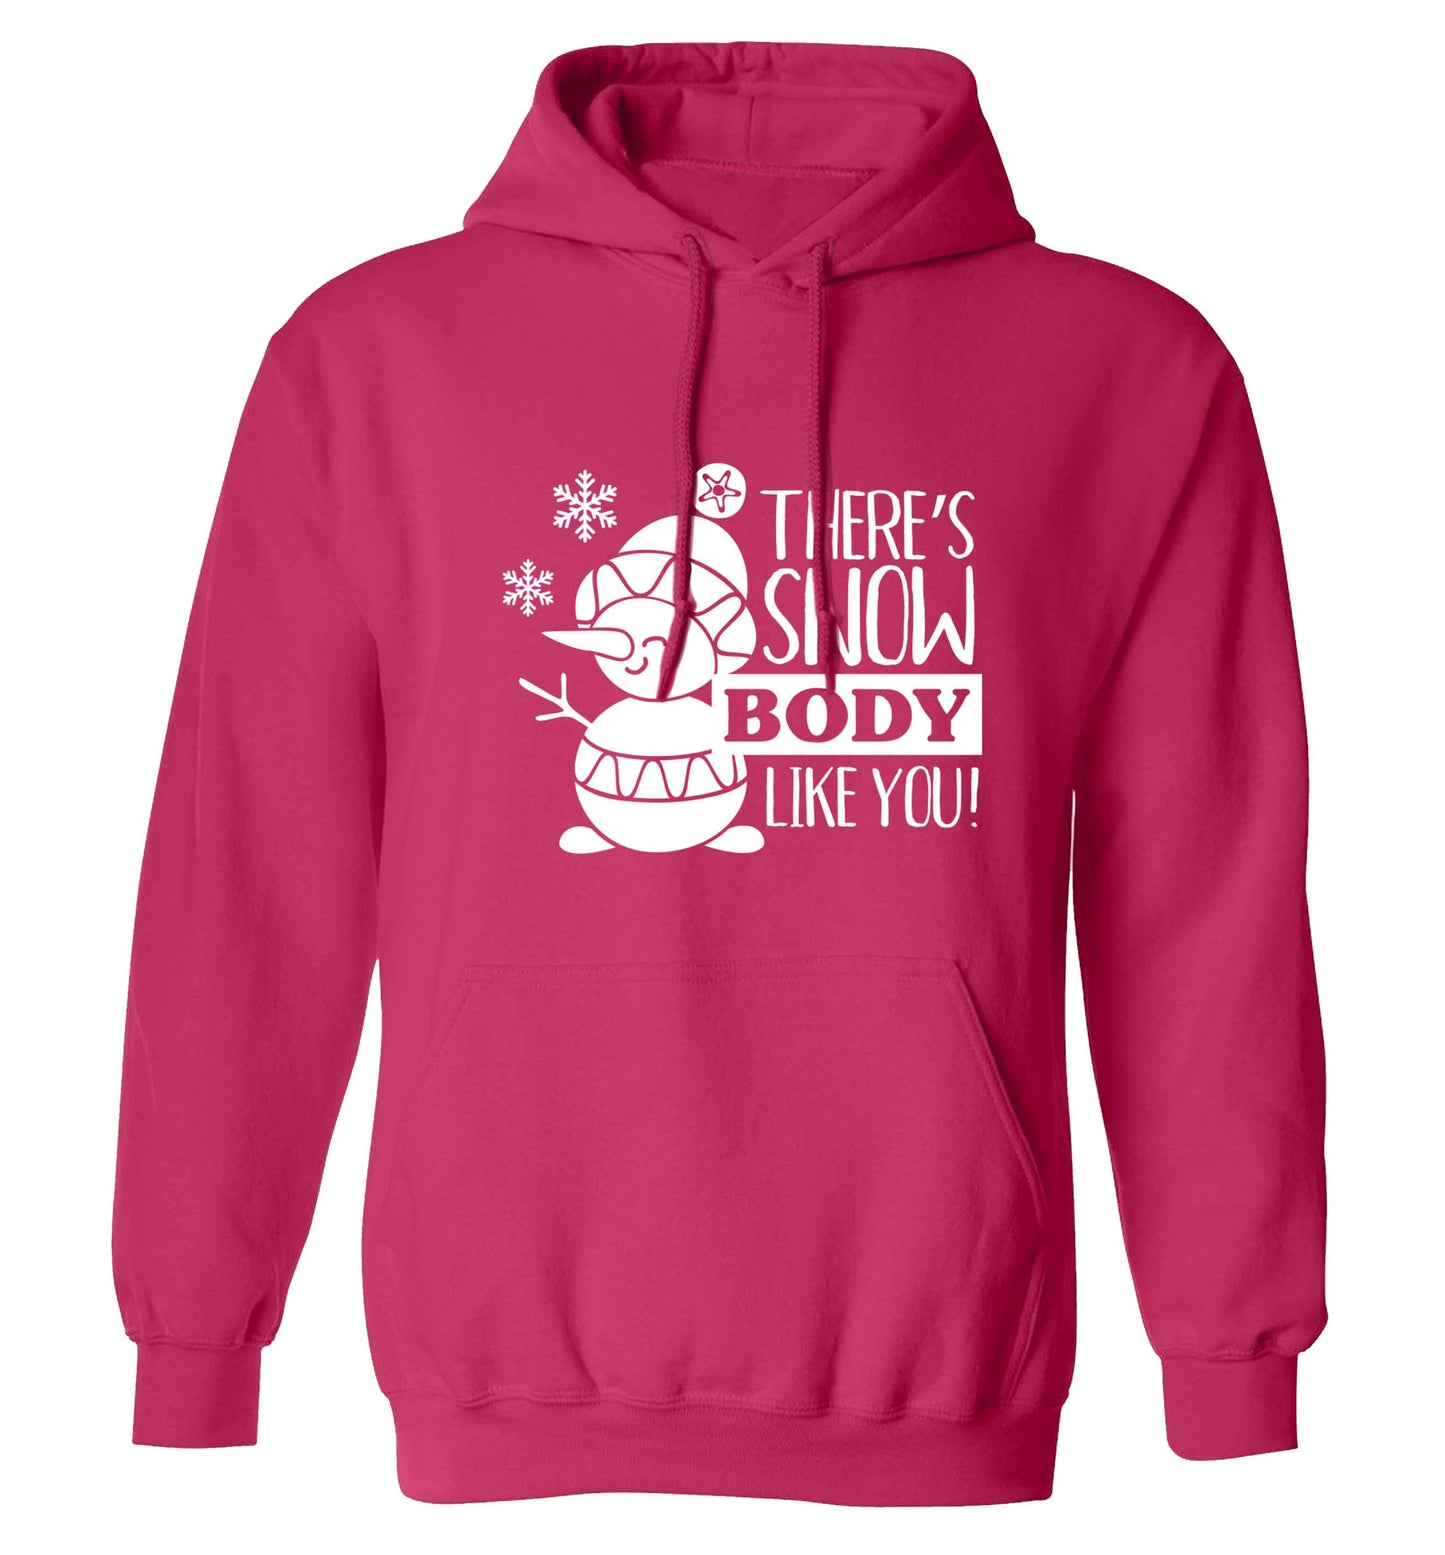 There's snow body like you adults unisex pink hoodie 2XL